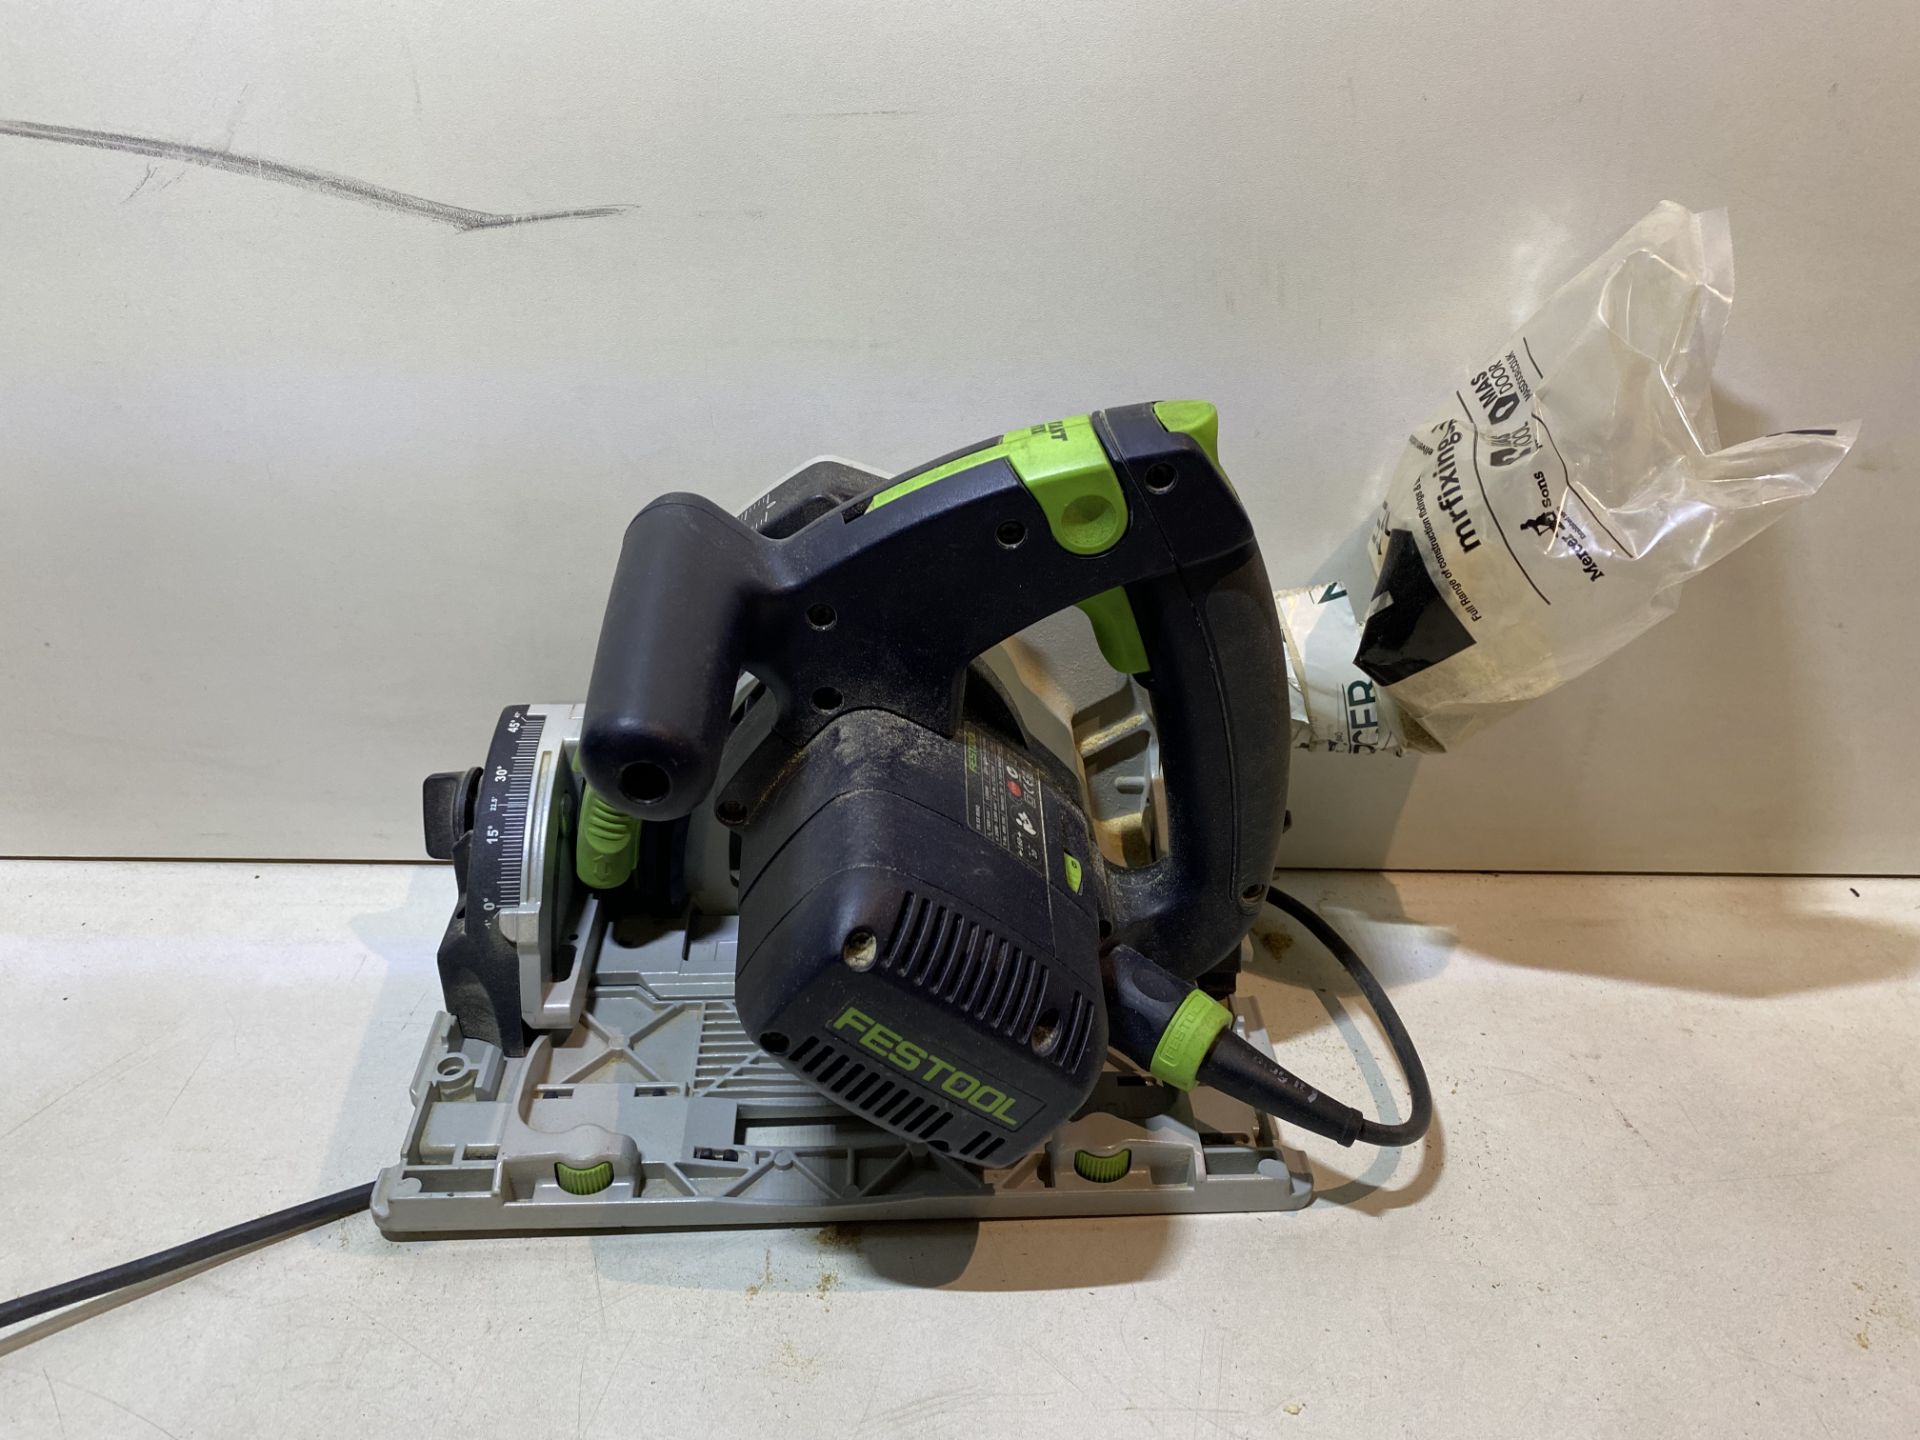 USED 561553 CIRCULAR PLUNGE SAW TS 55 REBQ-PLUS GB 240V - Missing Additional Parts - SEE PICTURES - Image 4 of 8